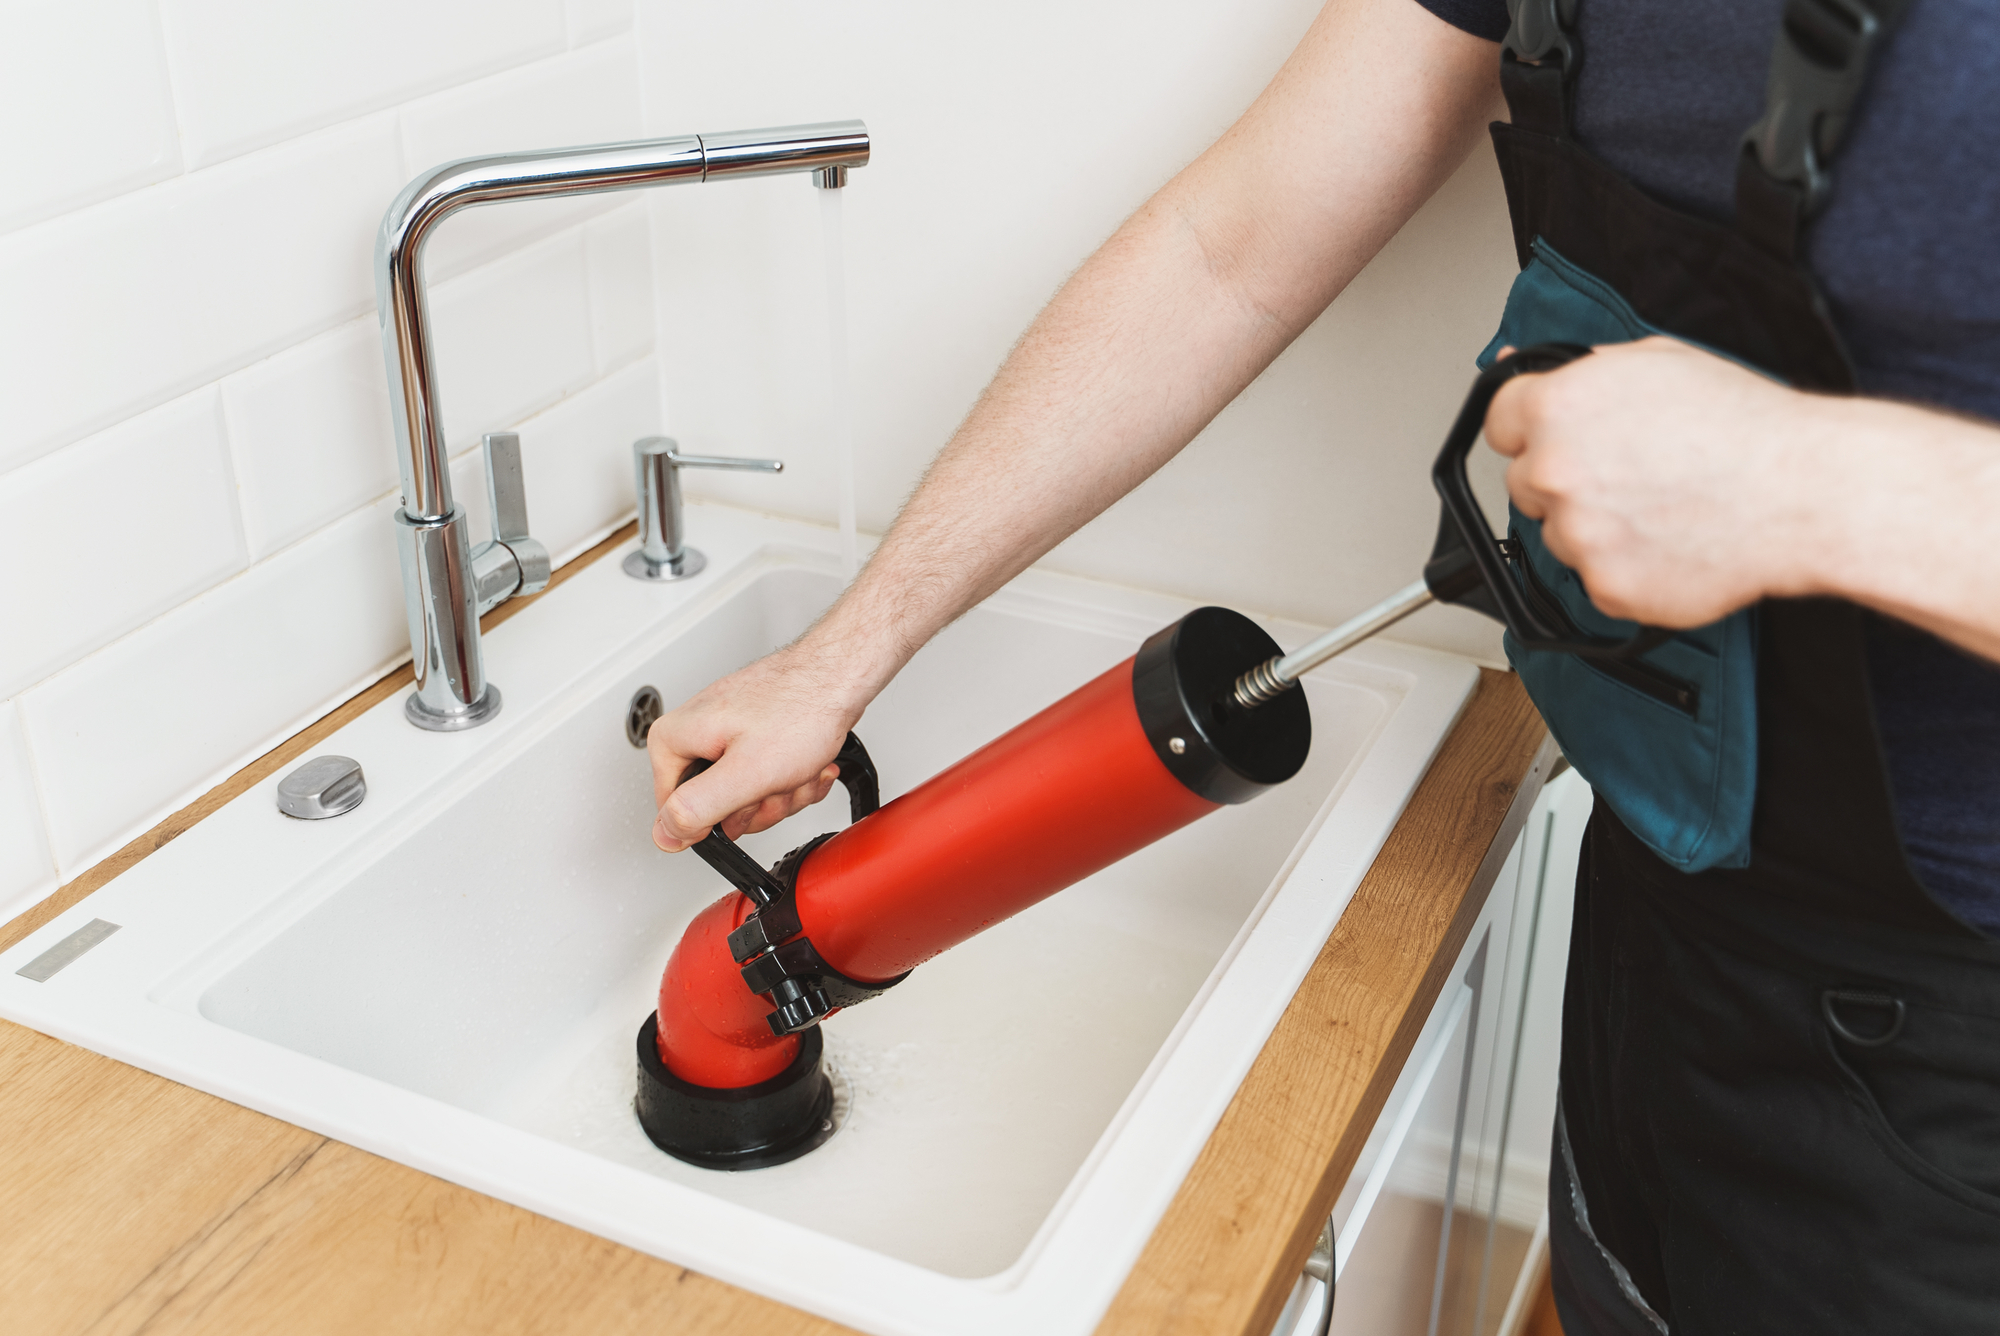 The Essential Guide to Maintaining Your Home Plumbing System